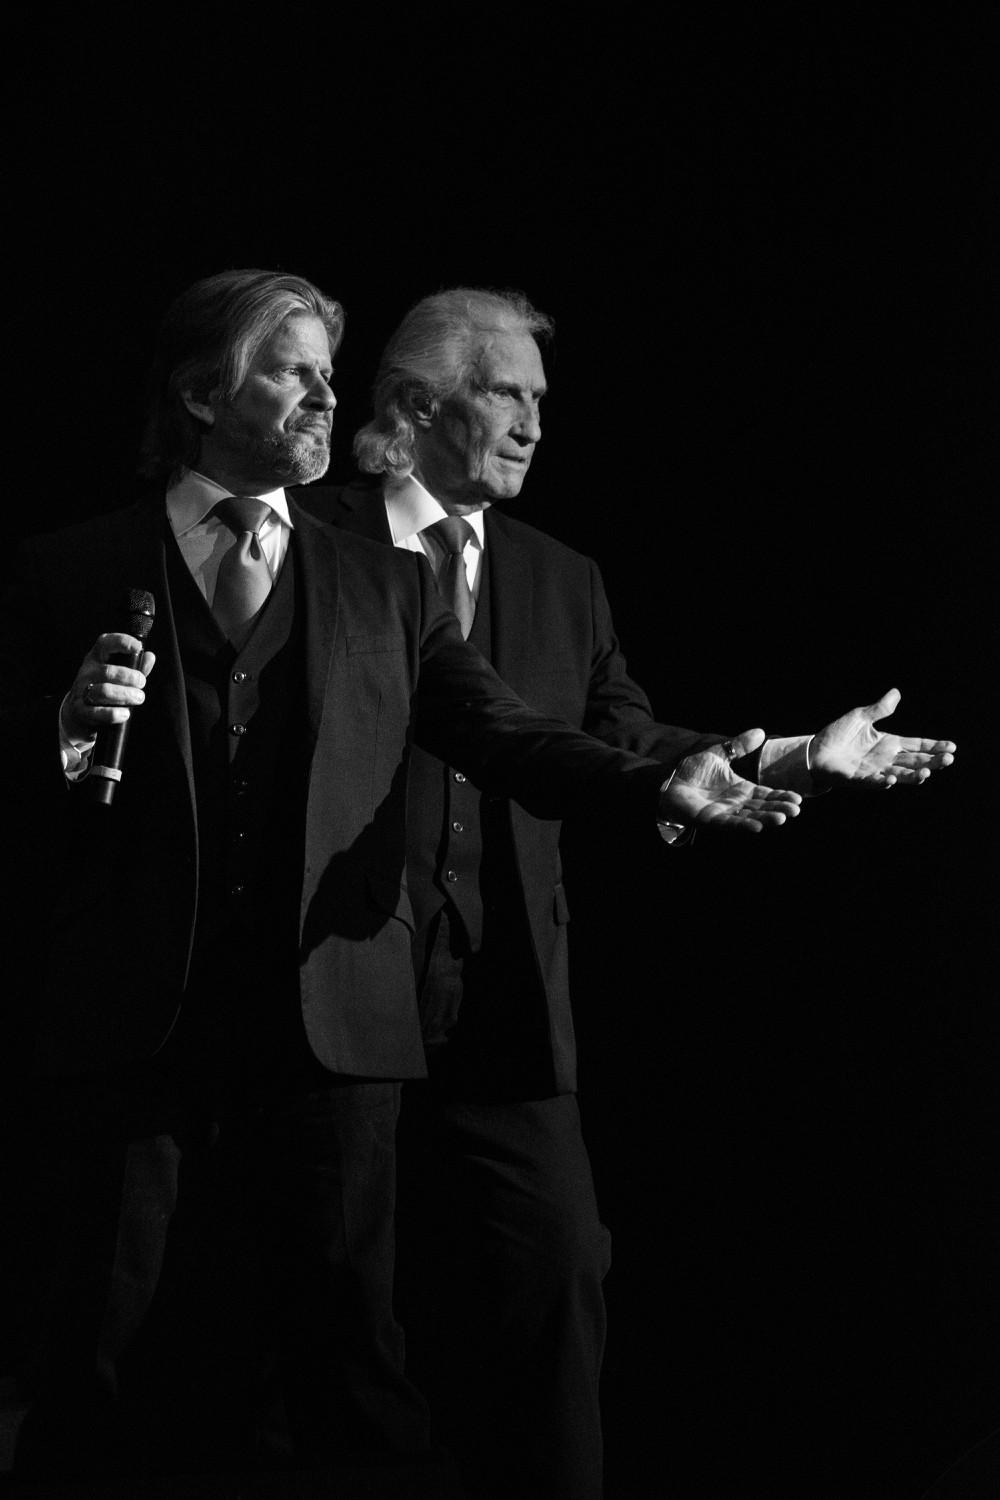 The Righteous Brothers perform at Smothers Theatre on Jan. 18. This musical duo presented their song "Hold on, I&squot;m Comin" at the beginning of the show. Photos by Perse Klopp